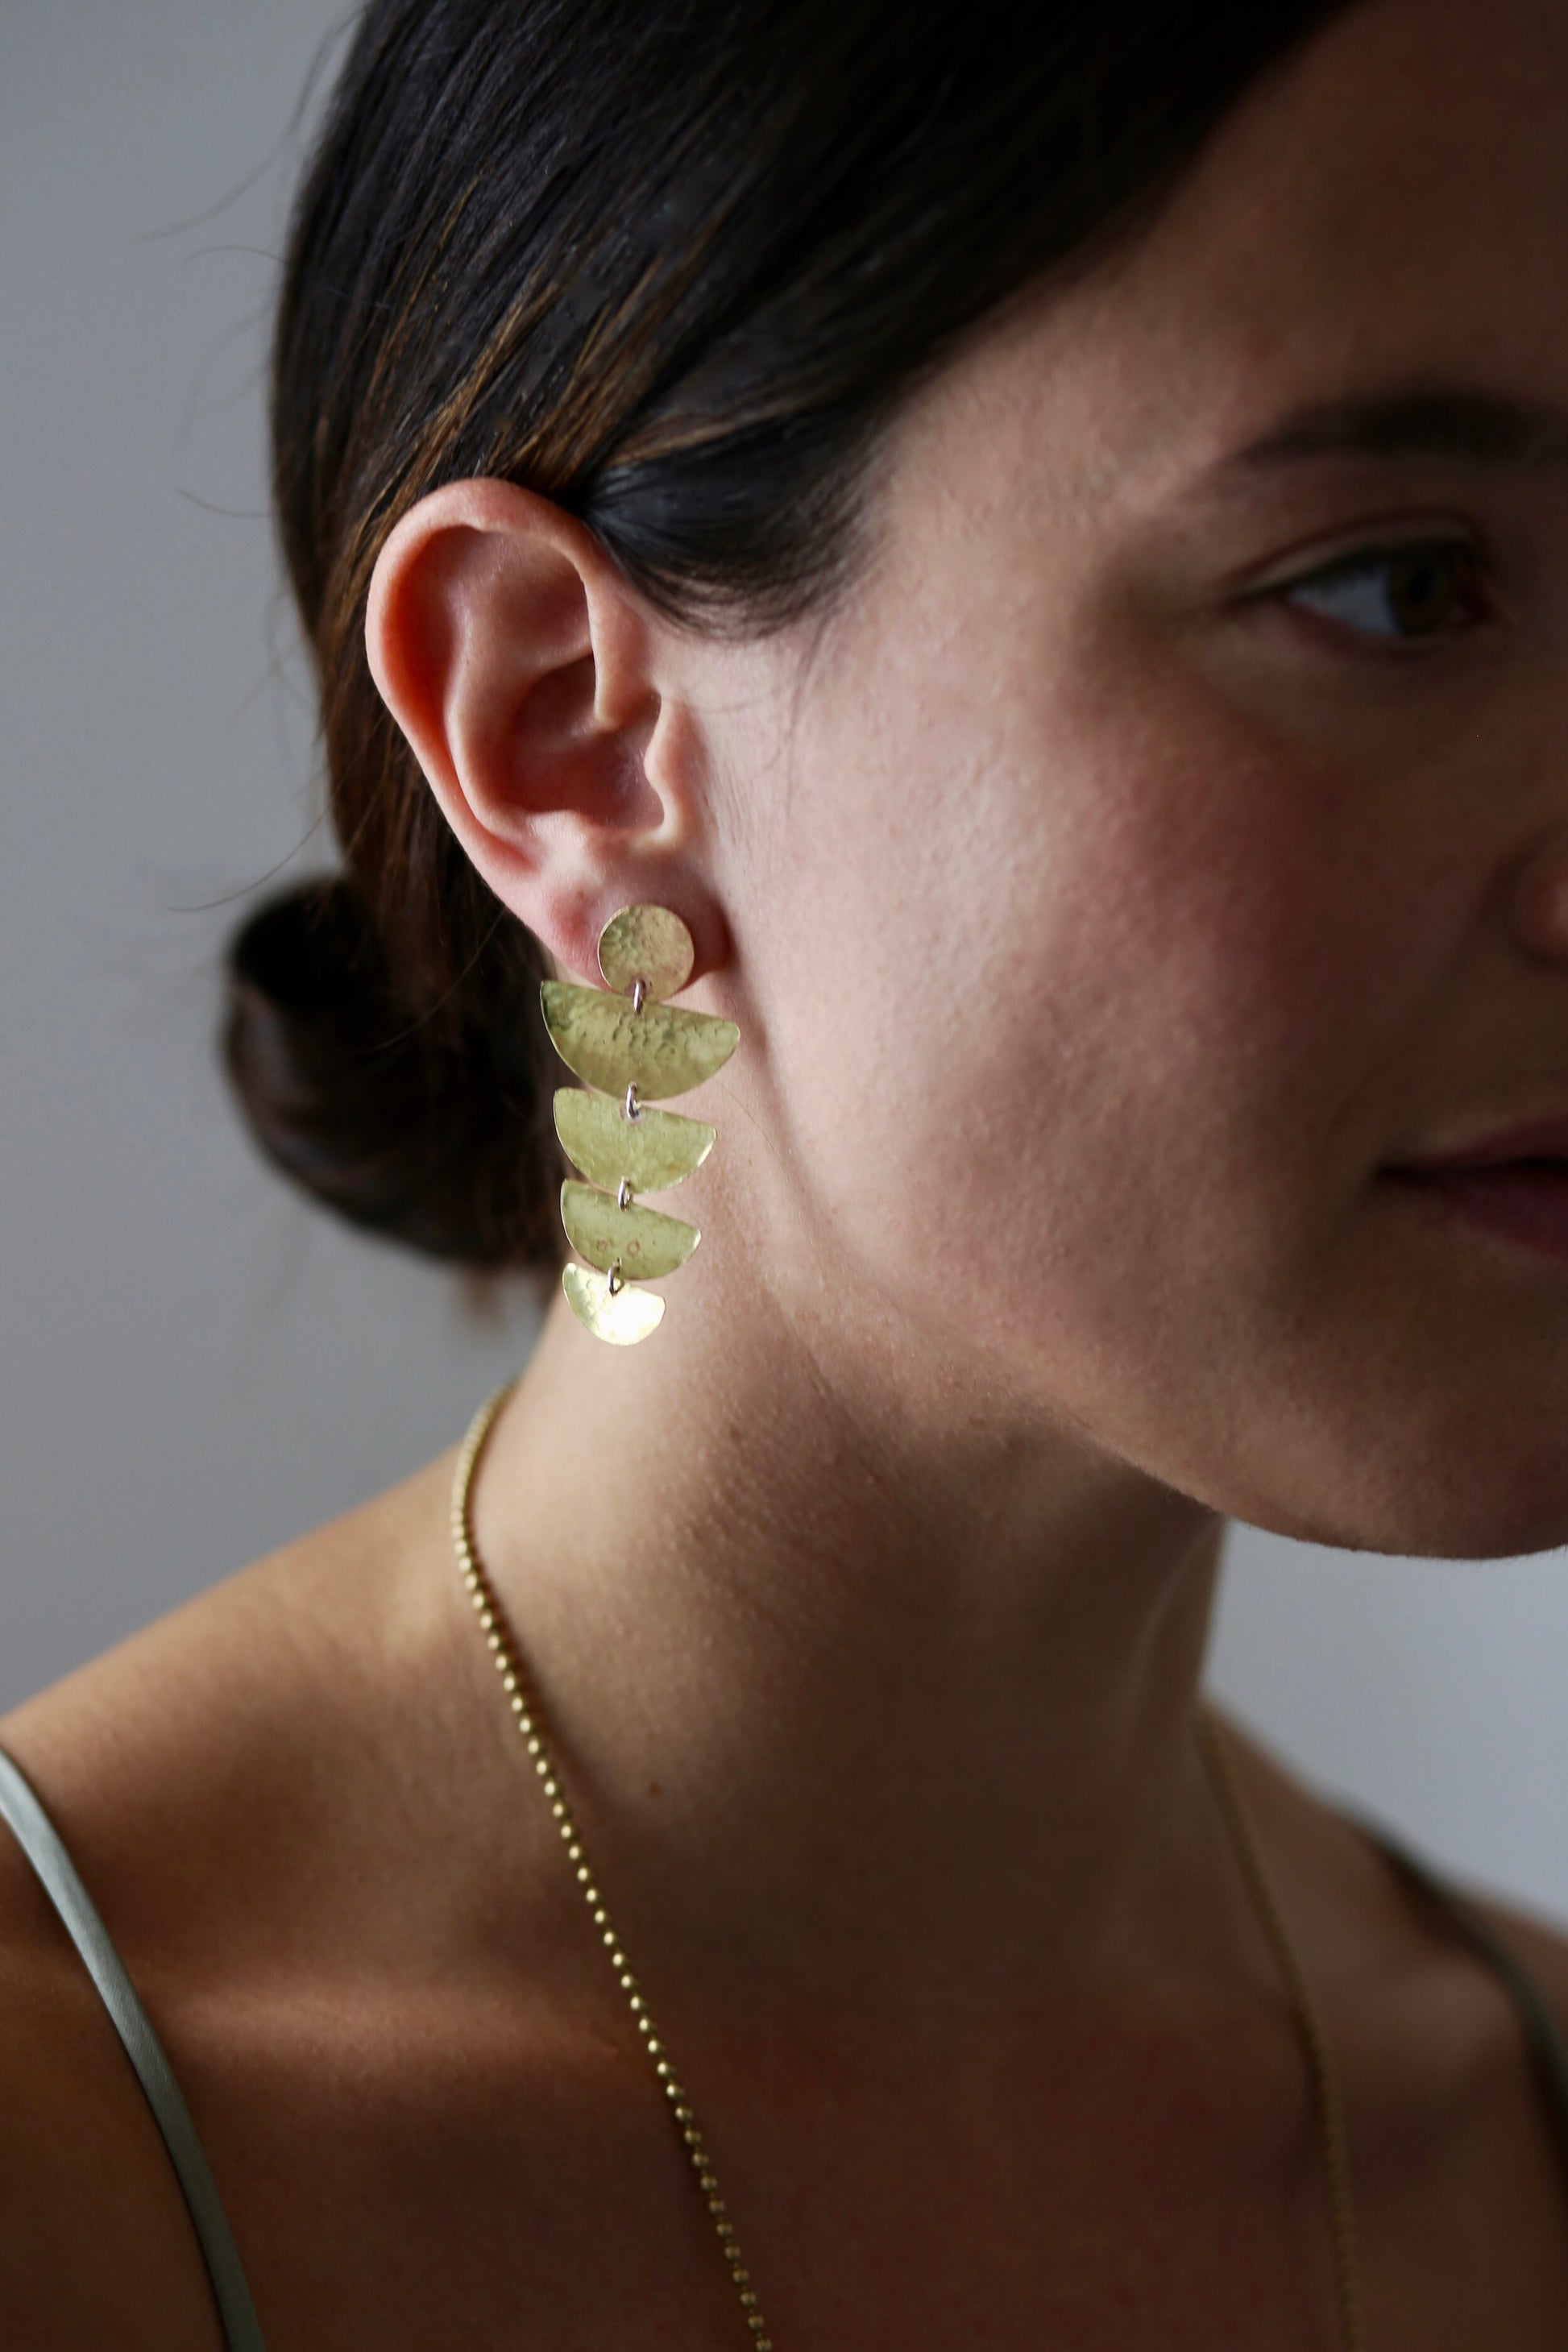 Bella Earrings: handmade with four graduated half moon shapes in recycled brass hanging from a brass disc, worn by a model.